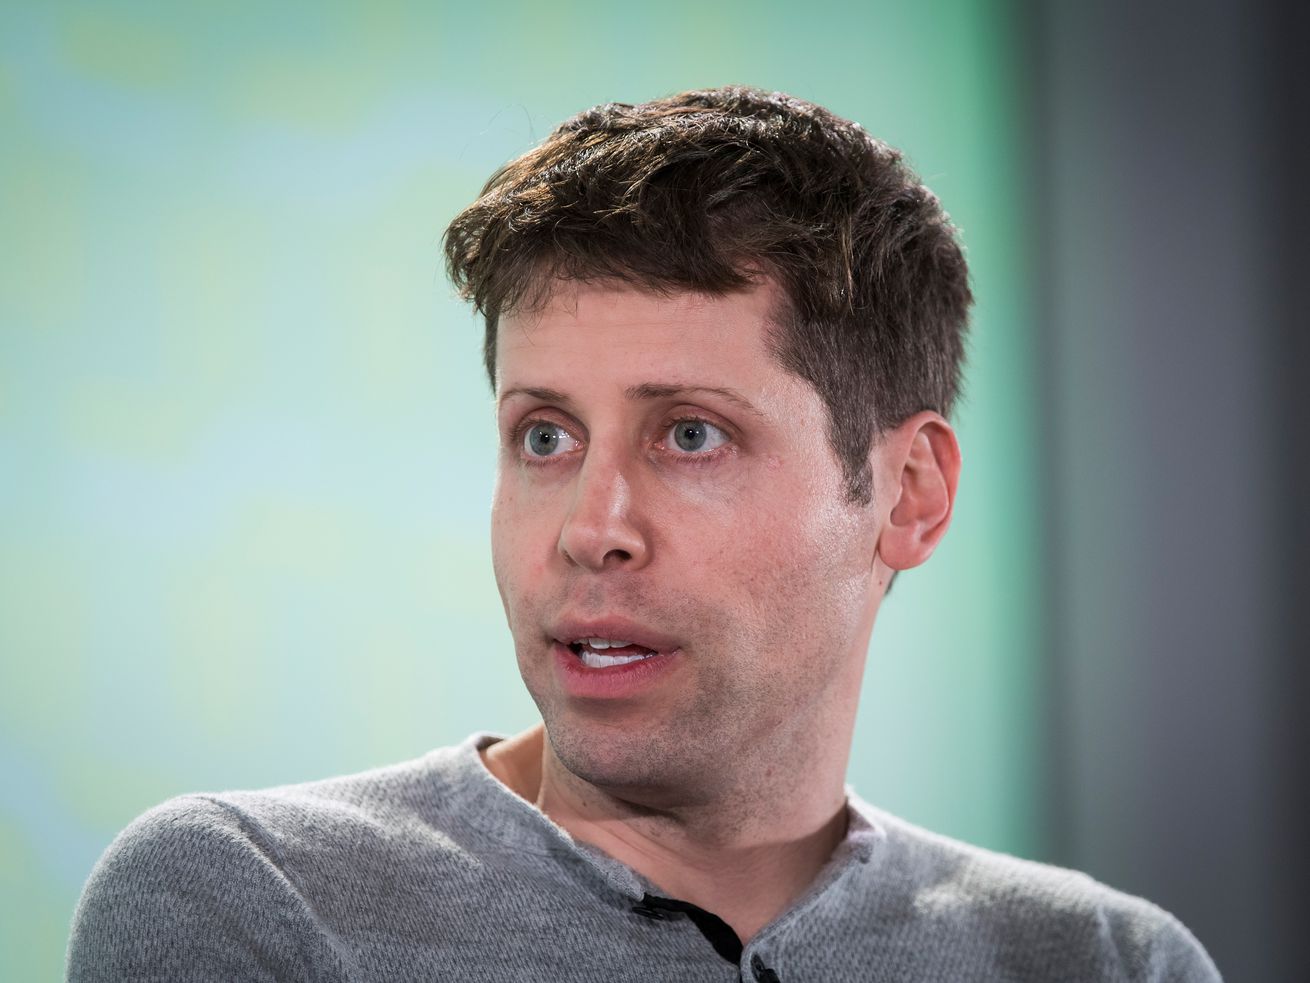 Sam Altman is pictured turning his head and talking.